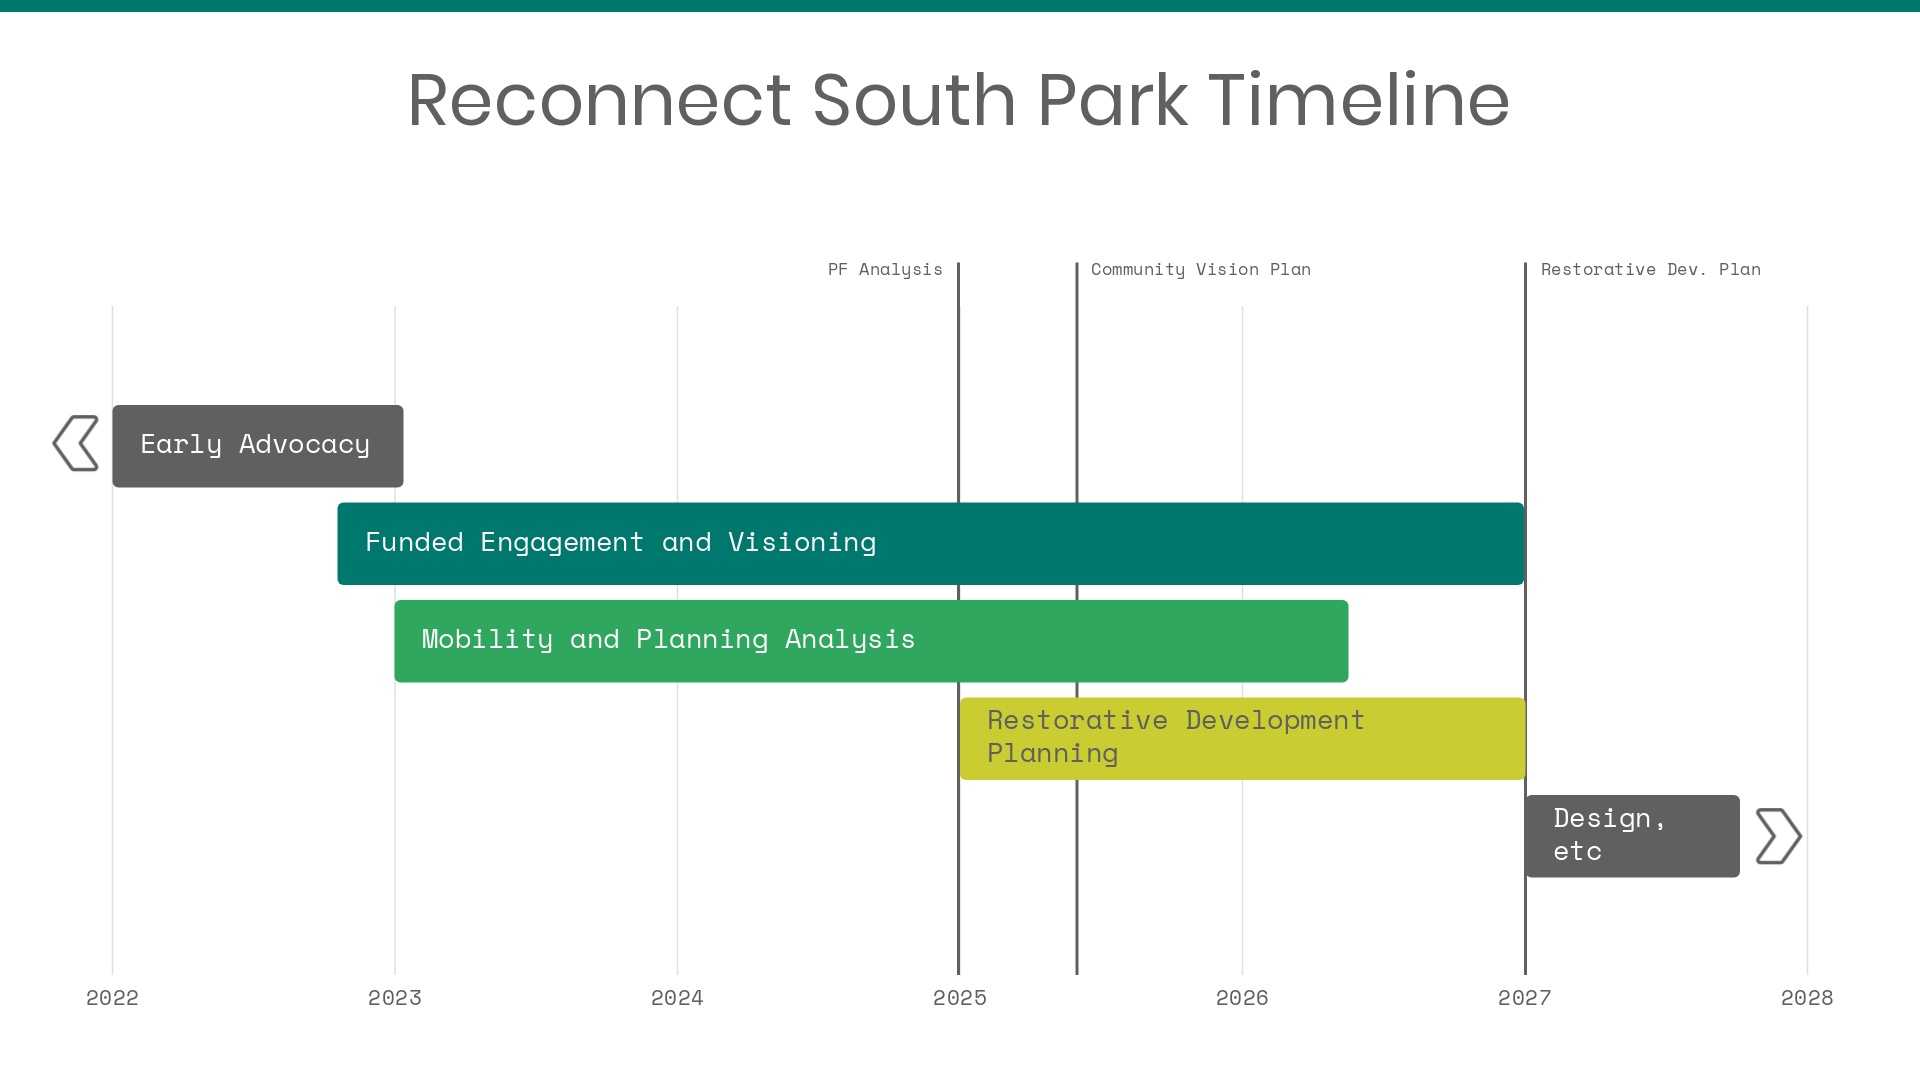 South Park timeline from 2022 to 2028